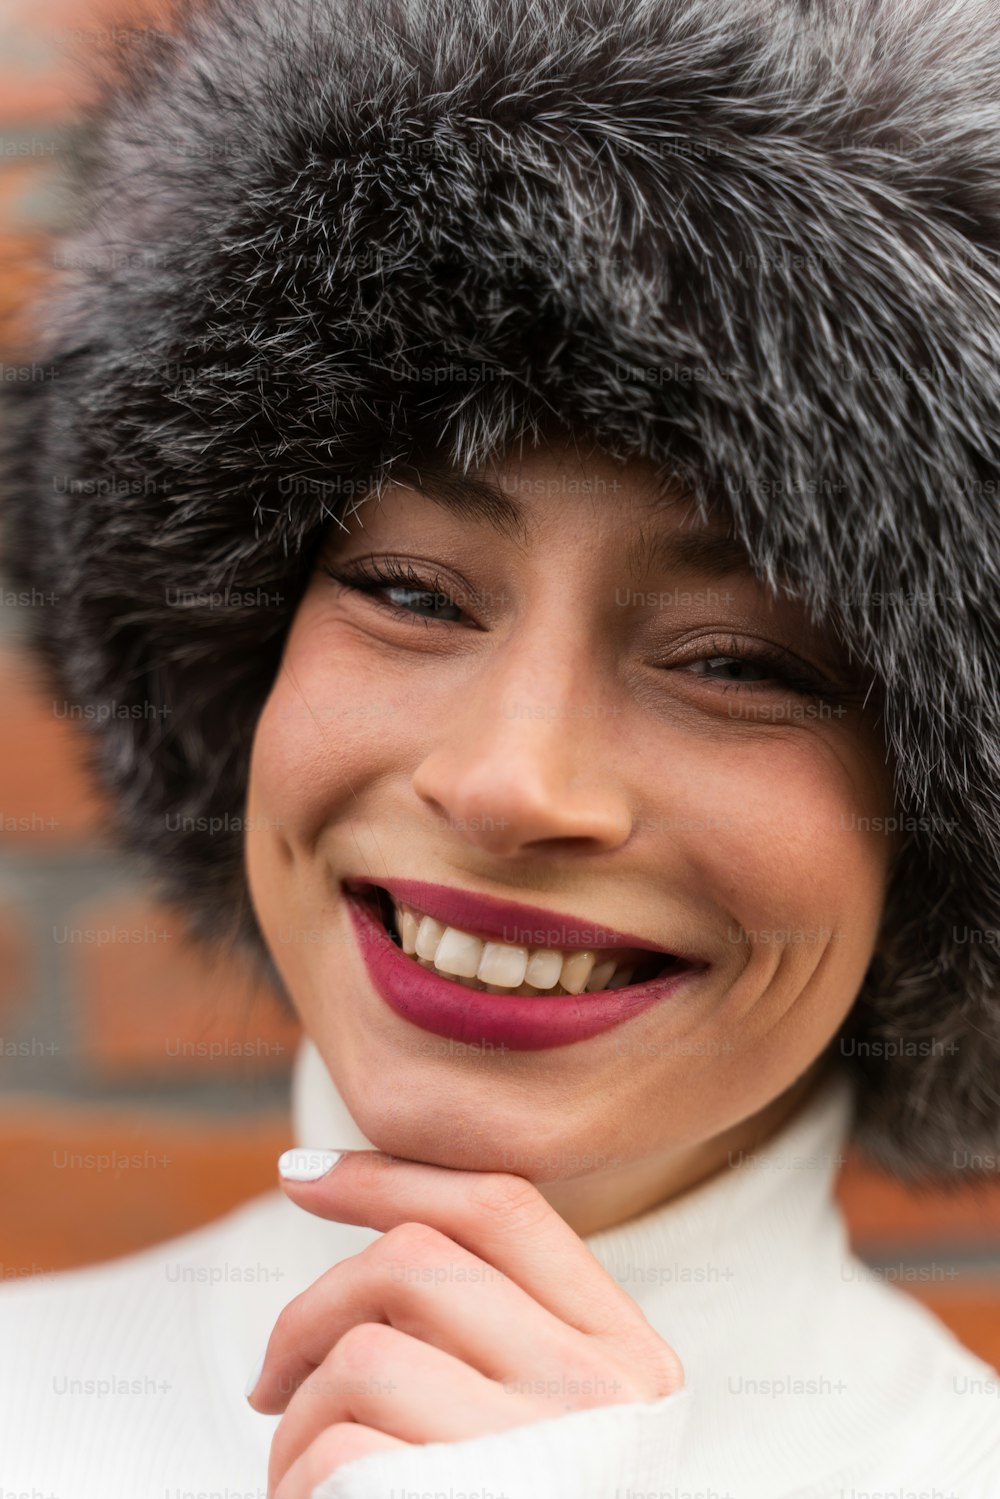 a woman wearing a fur hat and smiling